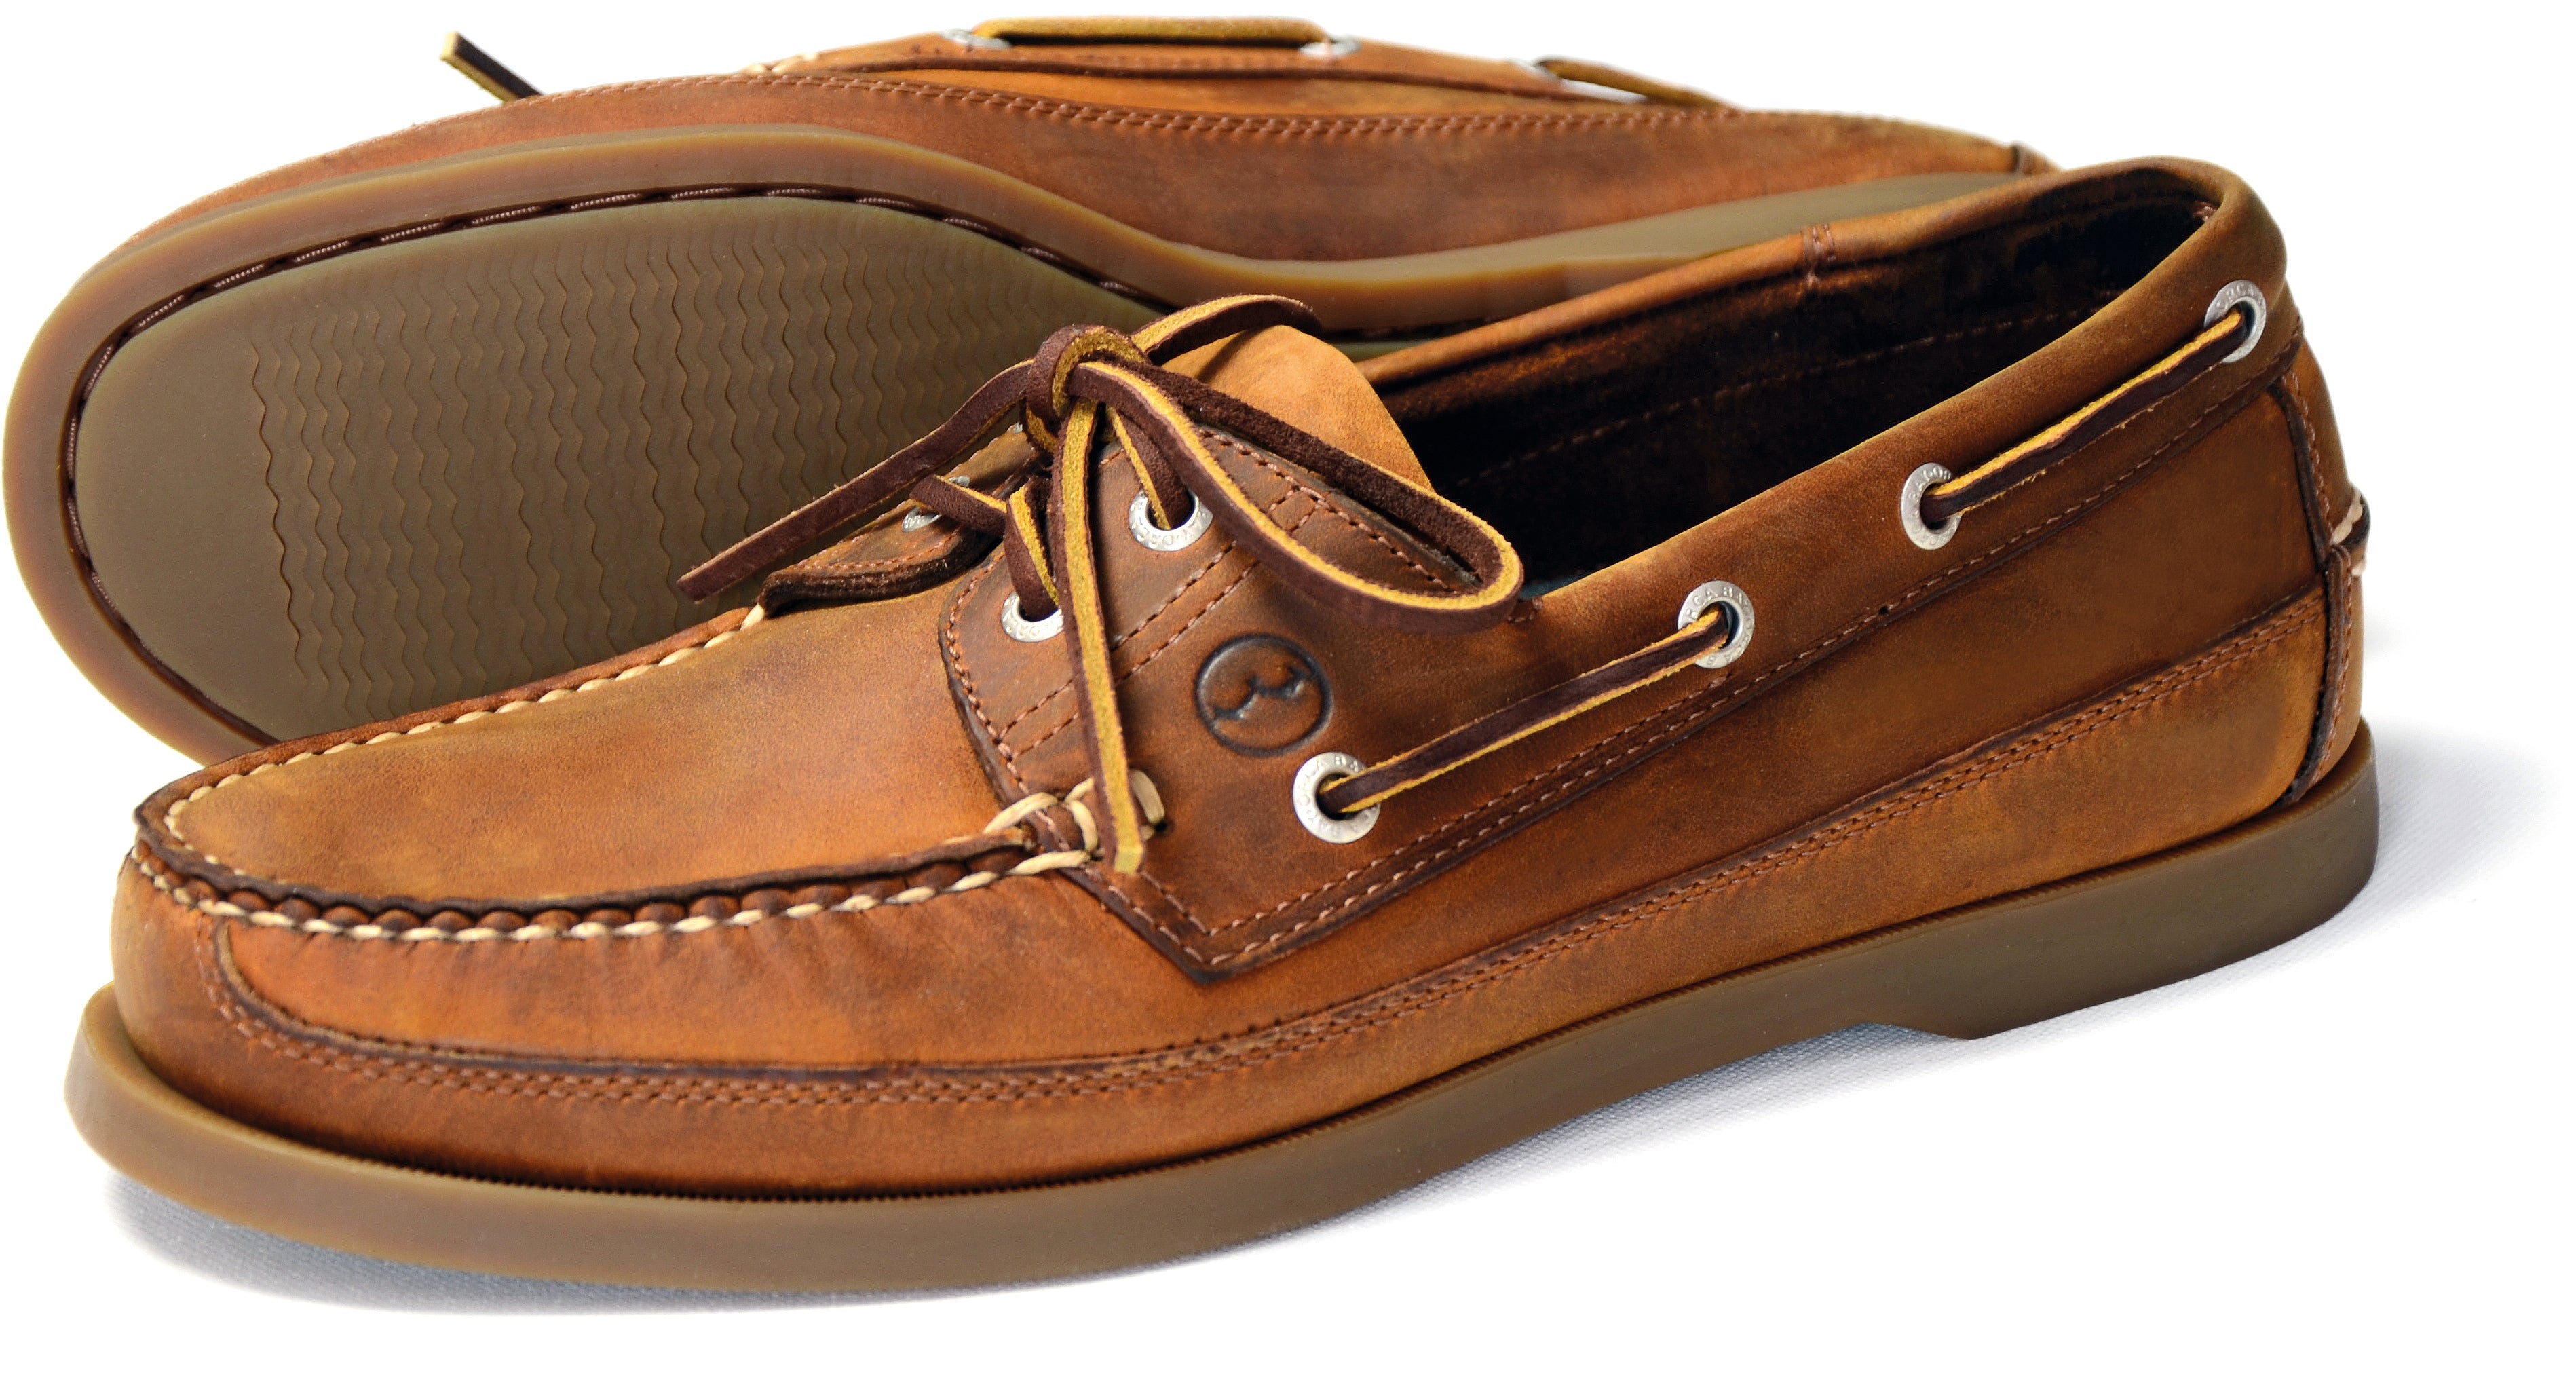 orca bay boat shoes